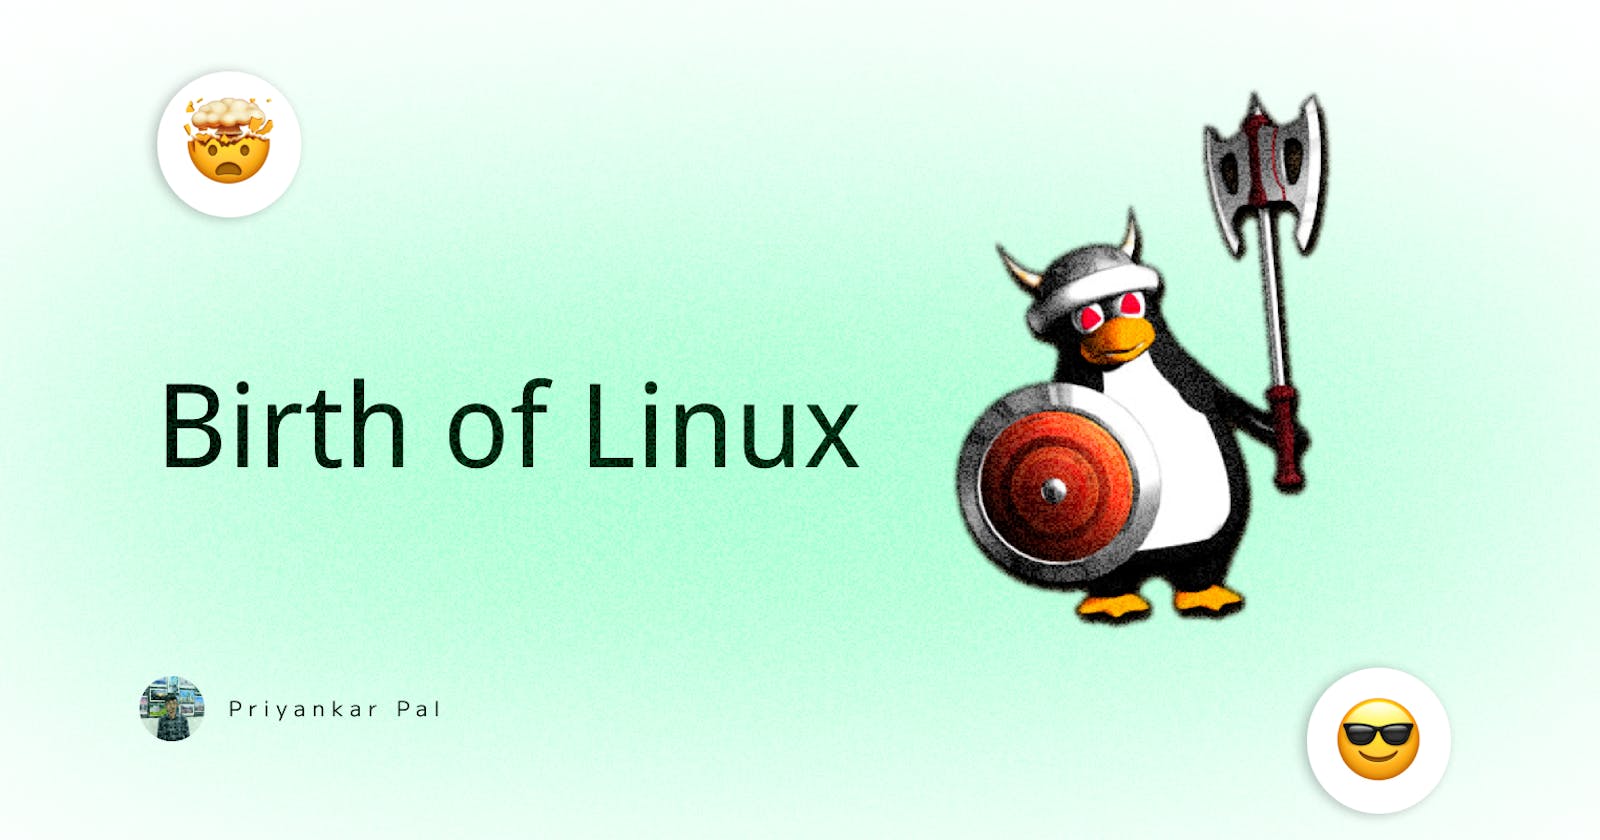 The birth of the Linux Kernel